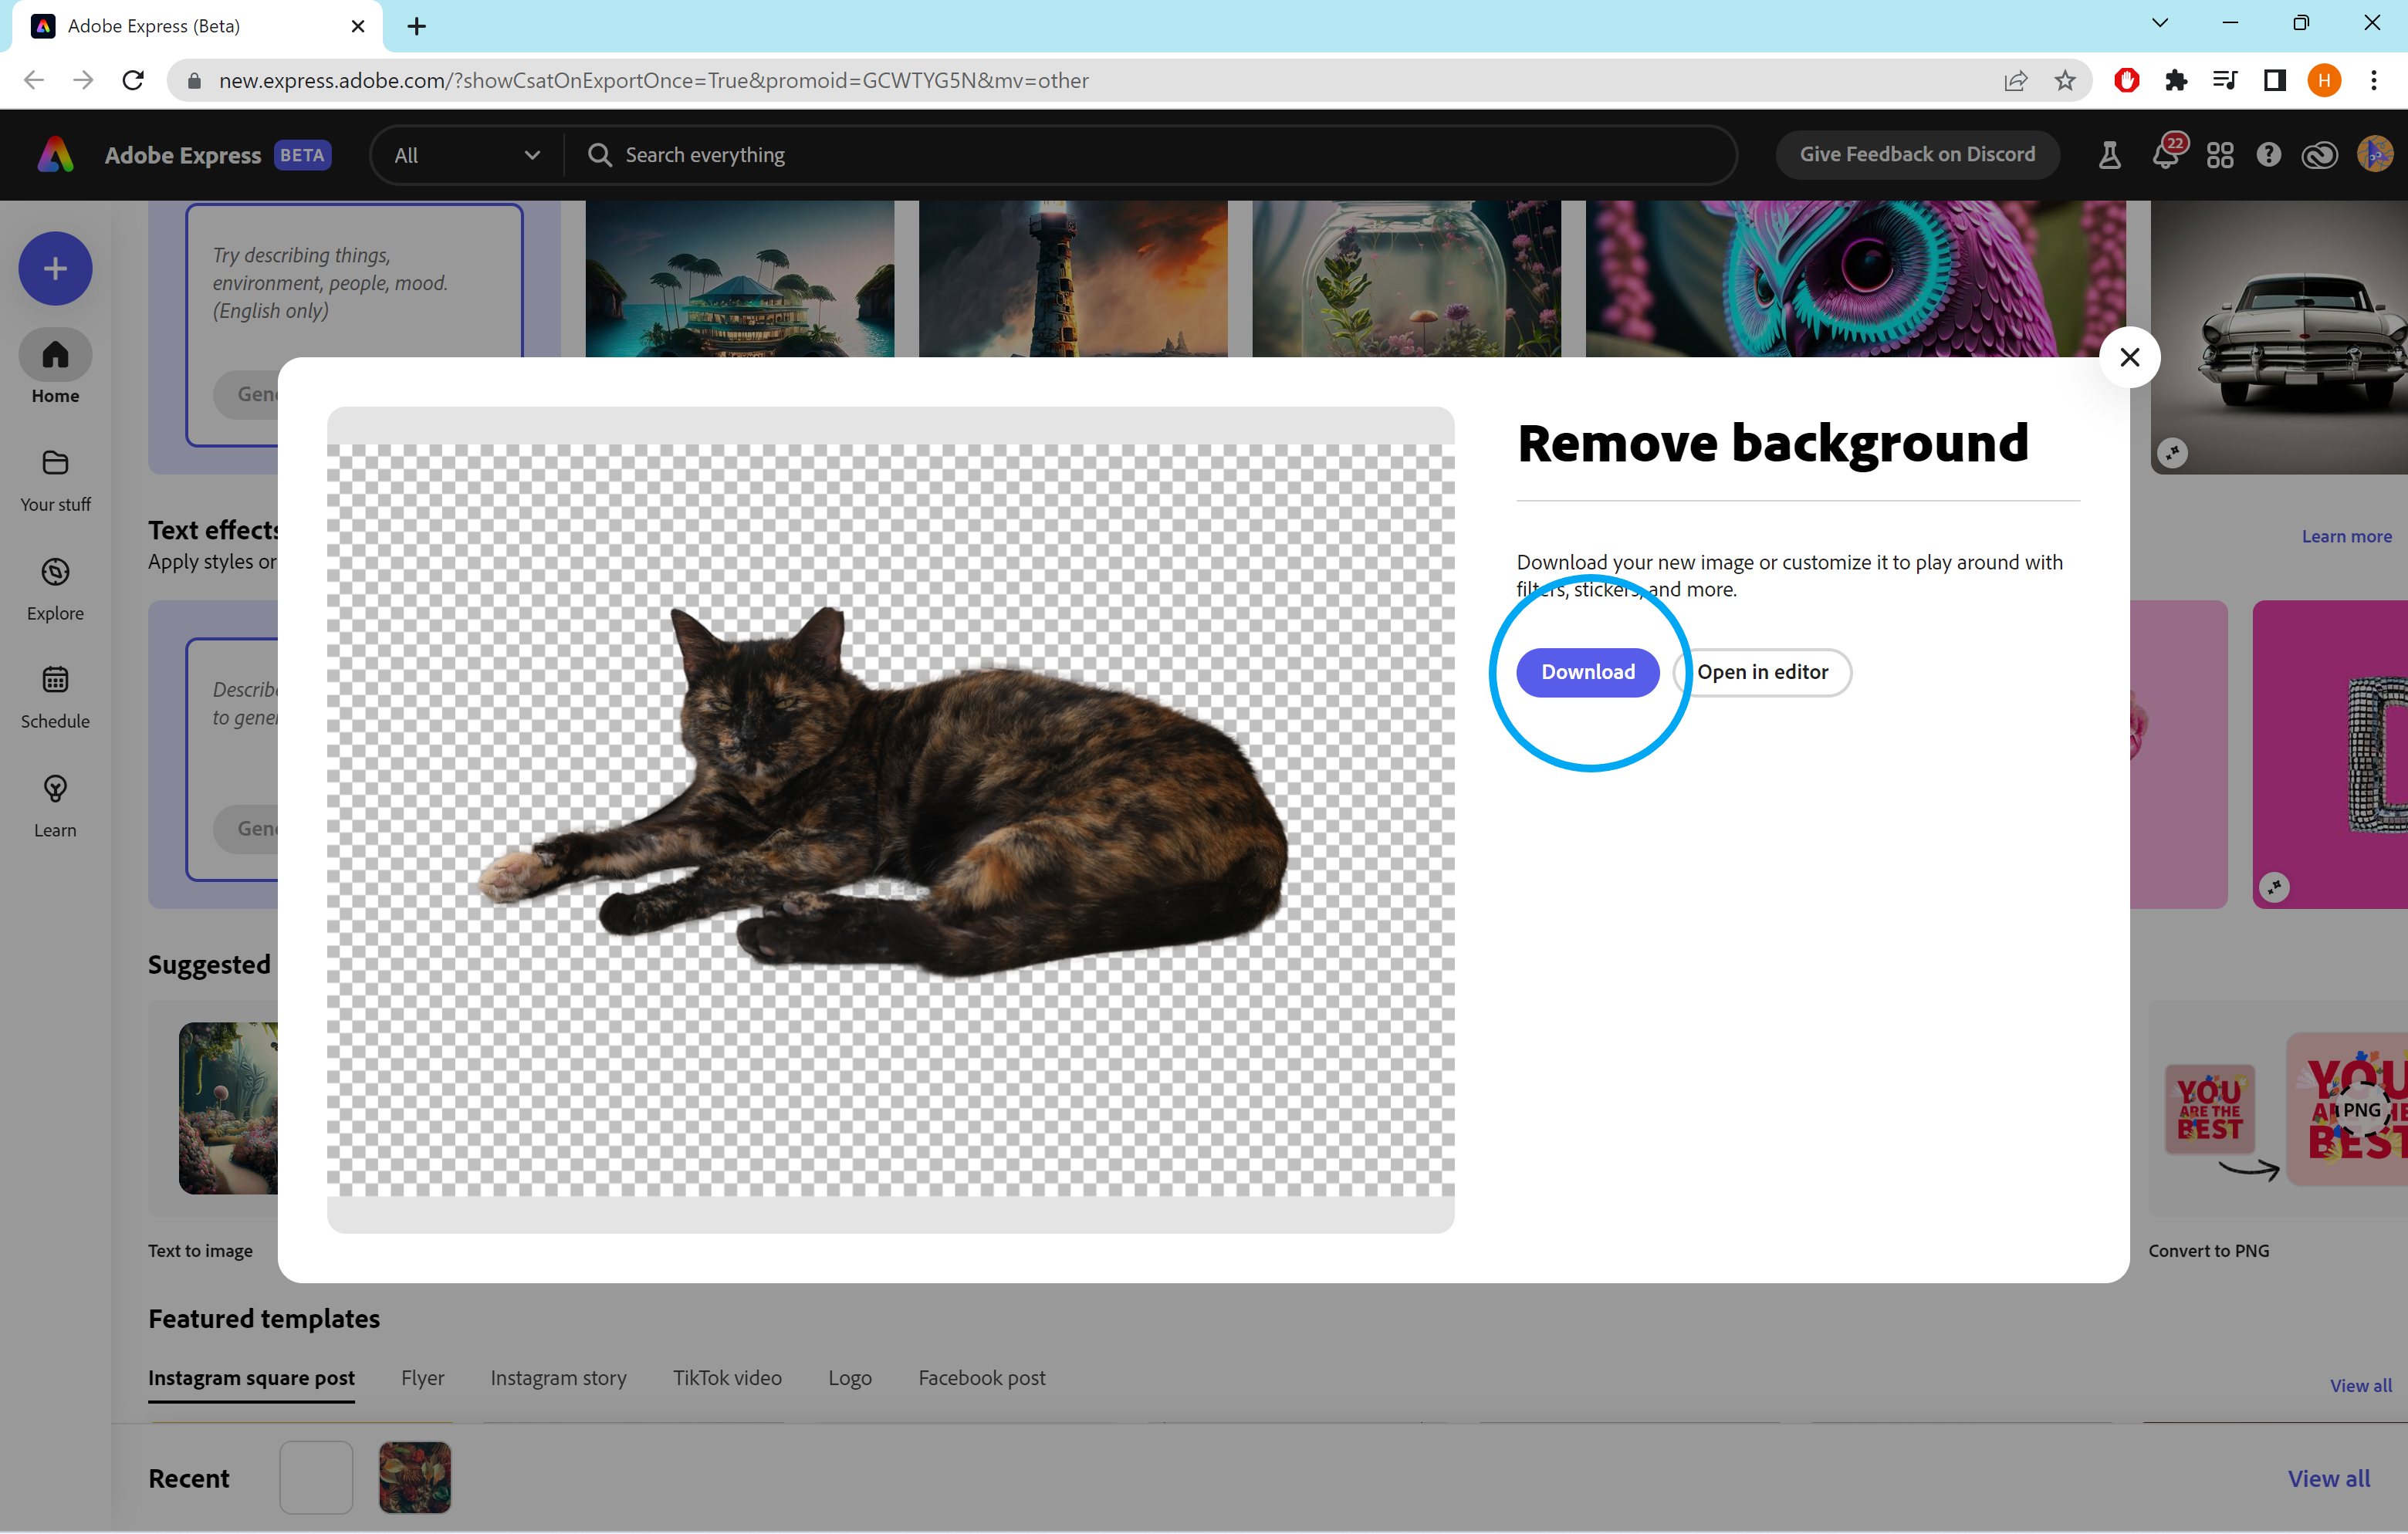 How to remove a background on Adobe Express